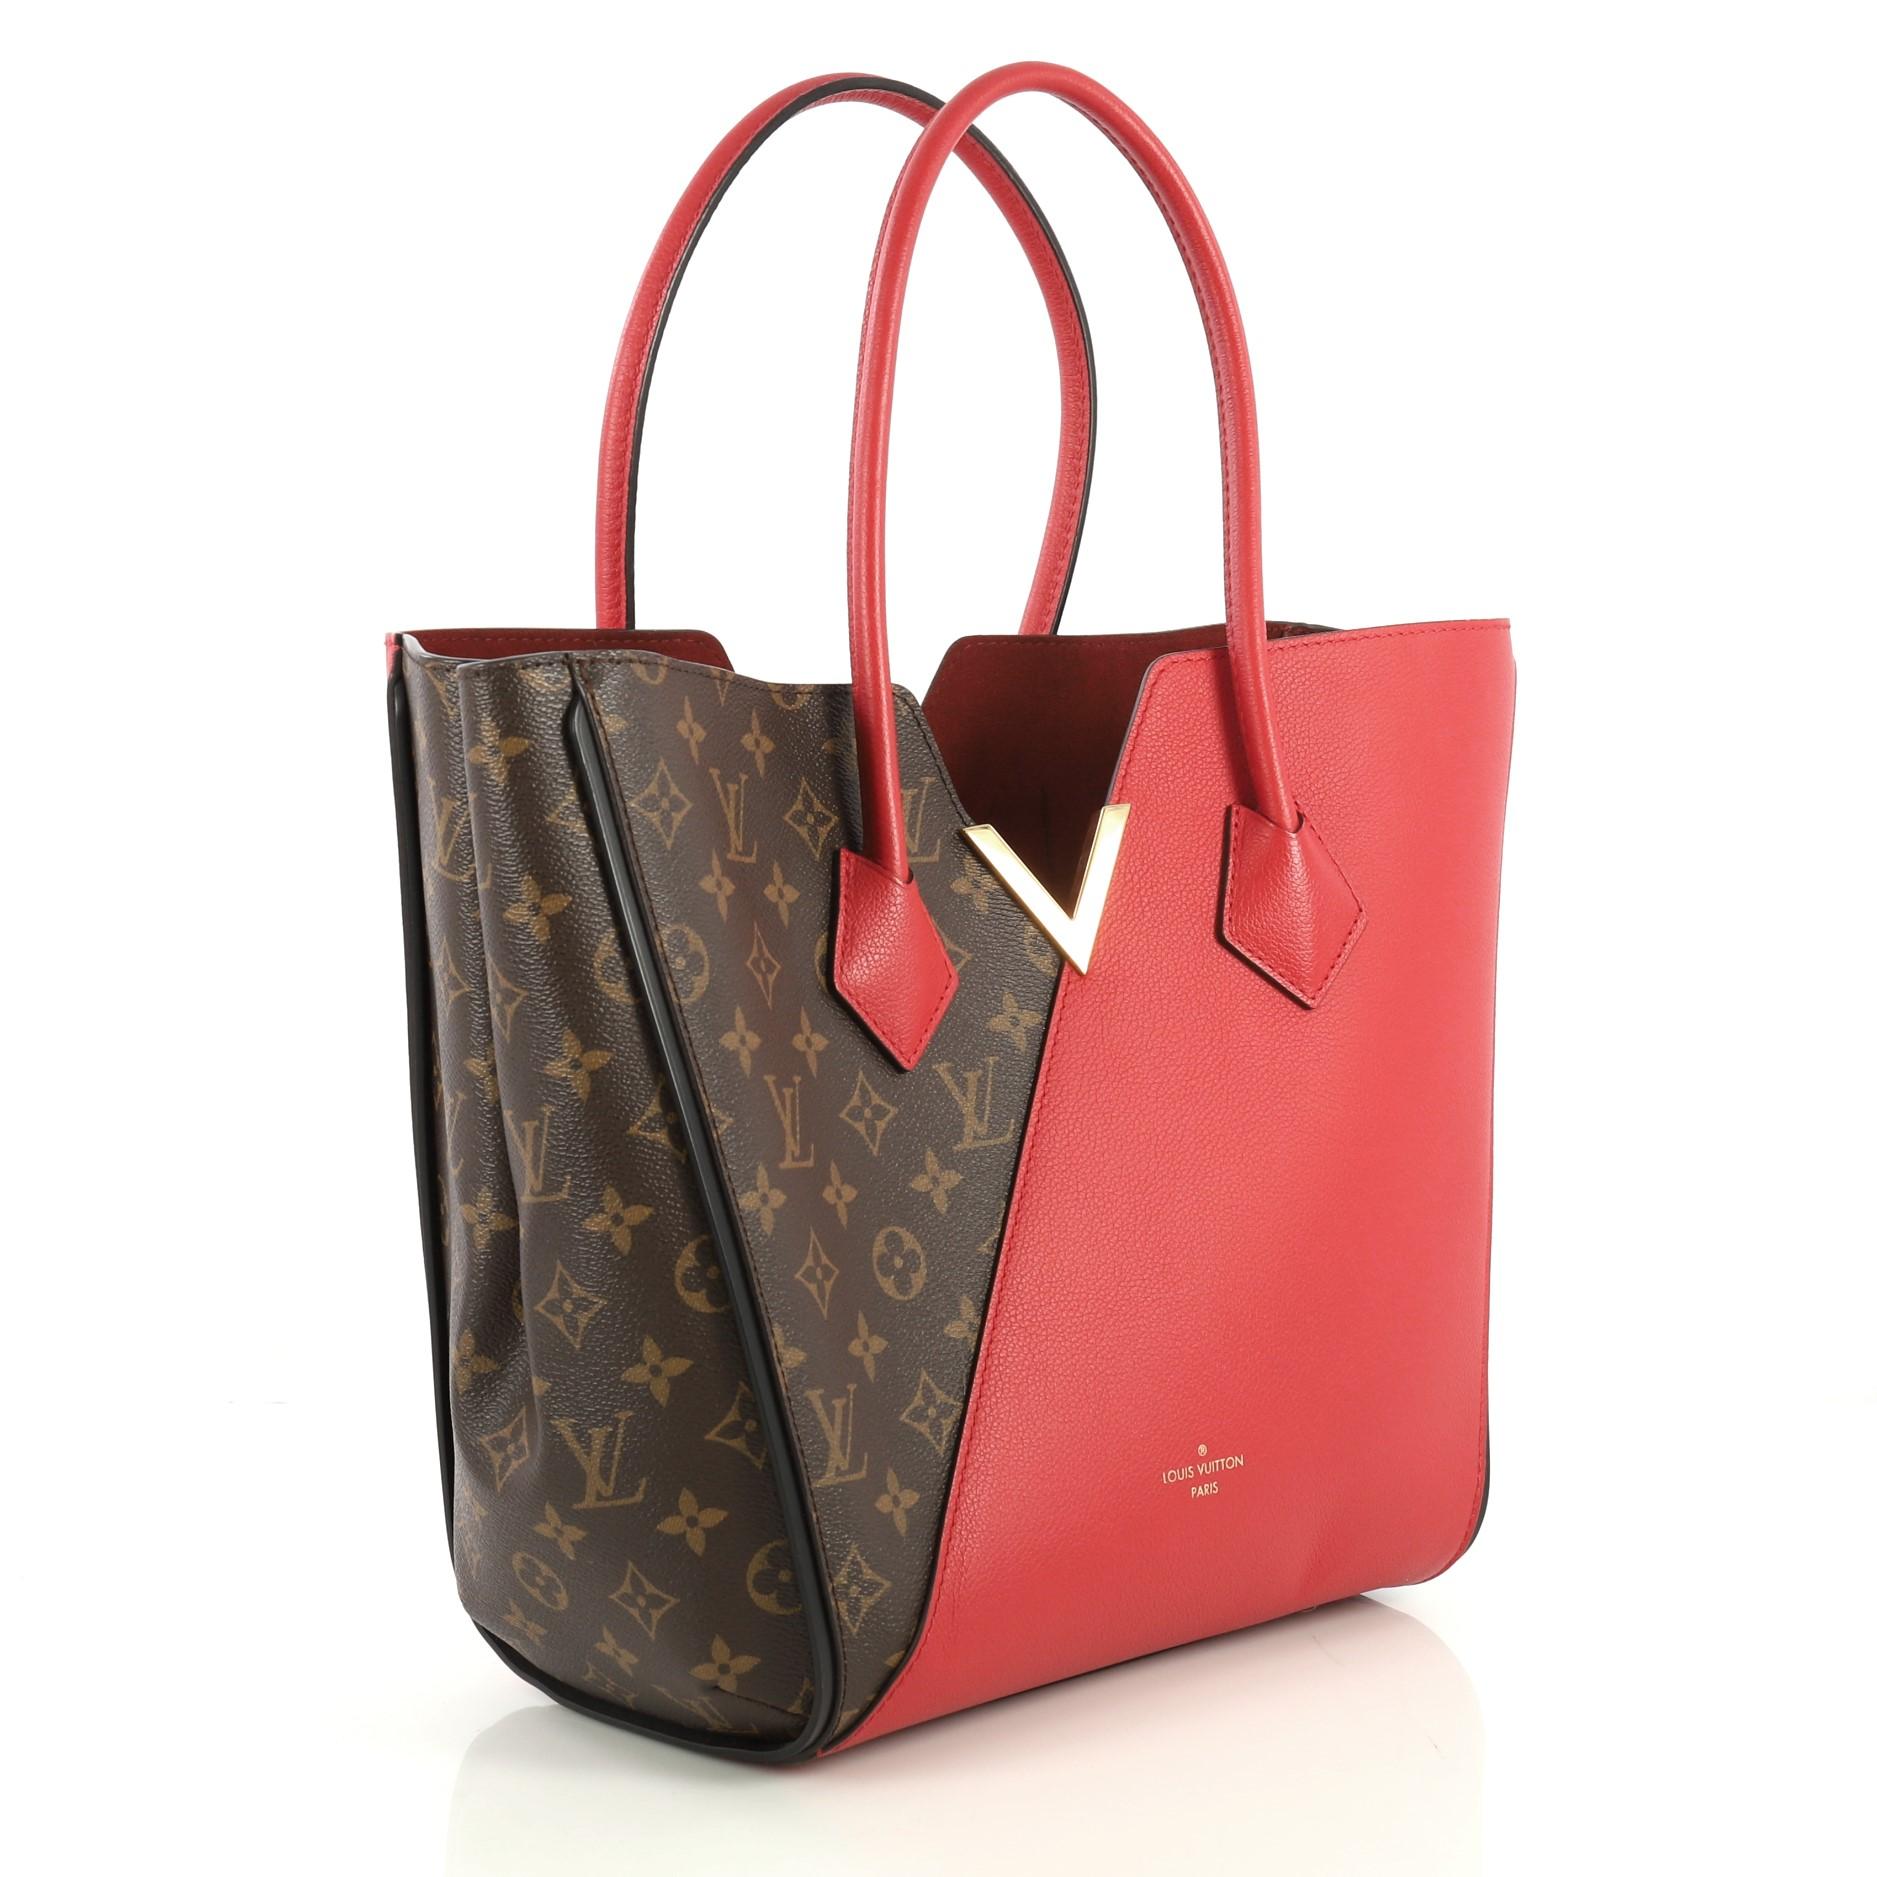 This Louis Vuitton Kimono Handbag Monogram Canvas and Leather MM, crafted from brown monogram coated canvas and red leather, features dual rolled top handles, metallic V-cross accent, and gold-tone hardware. Its wide top with hook-clasp closure